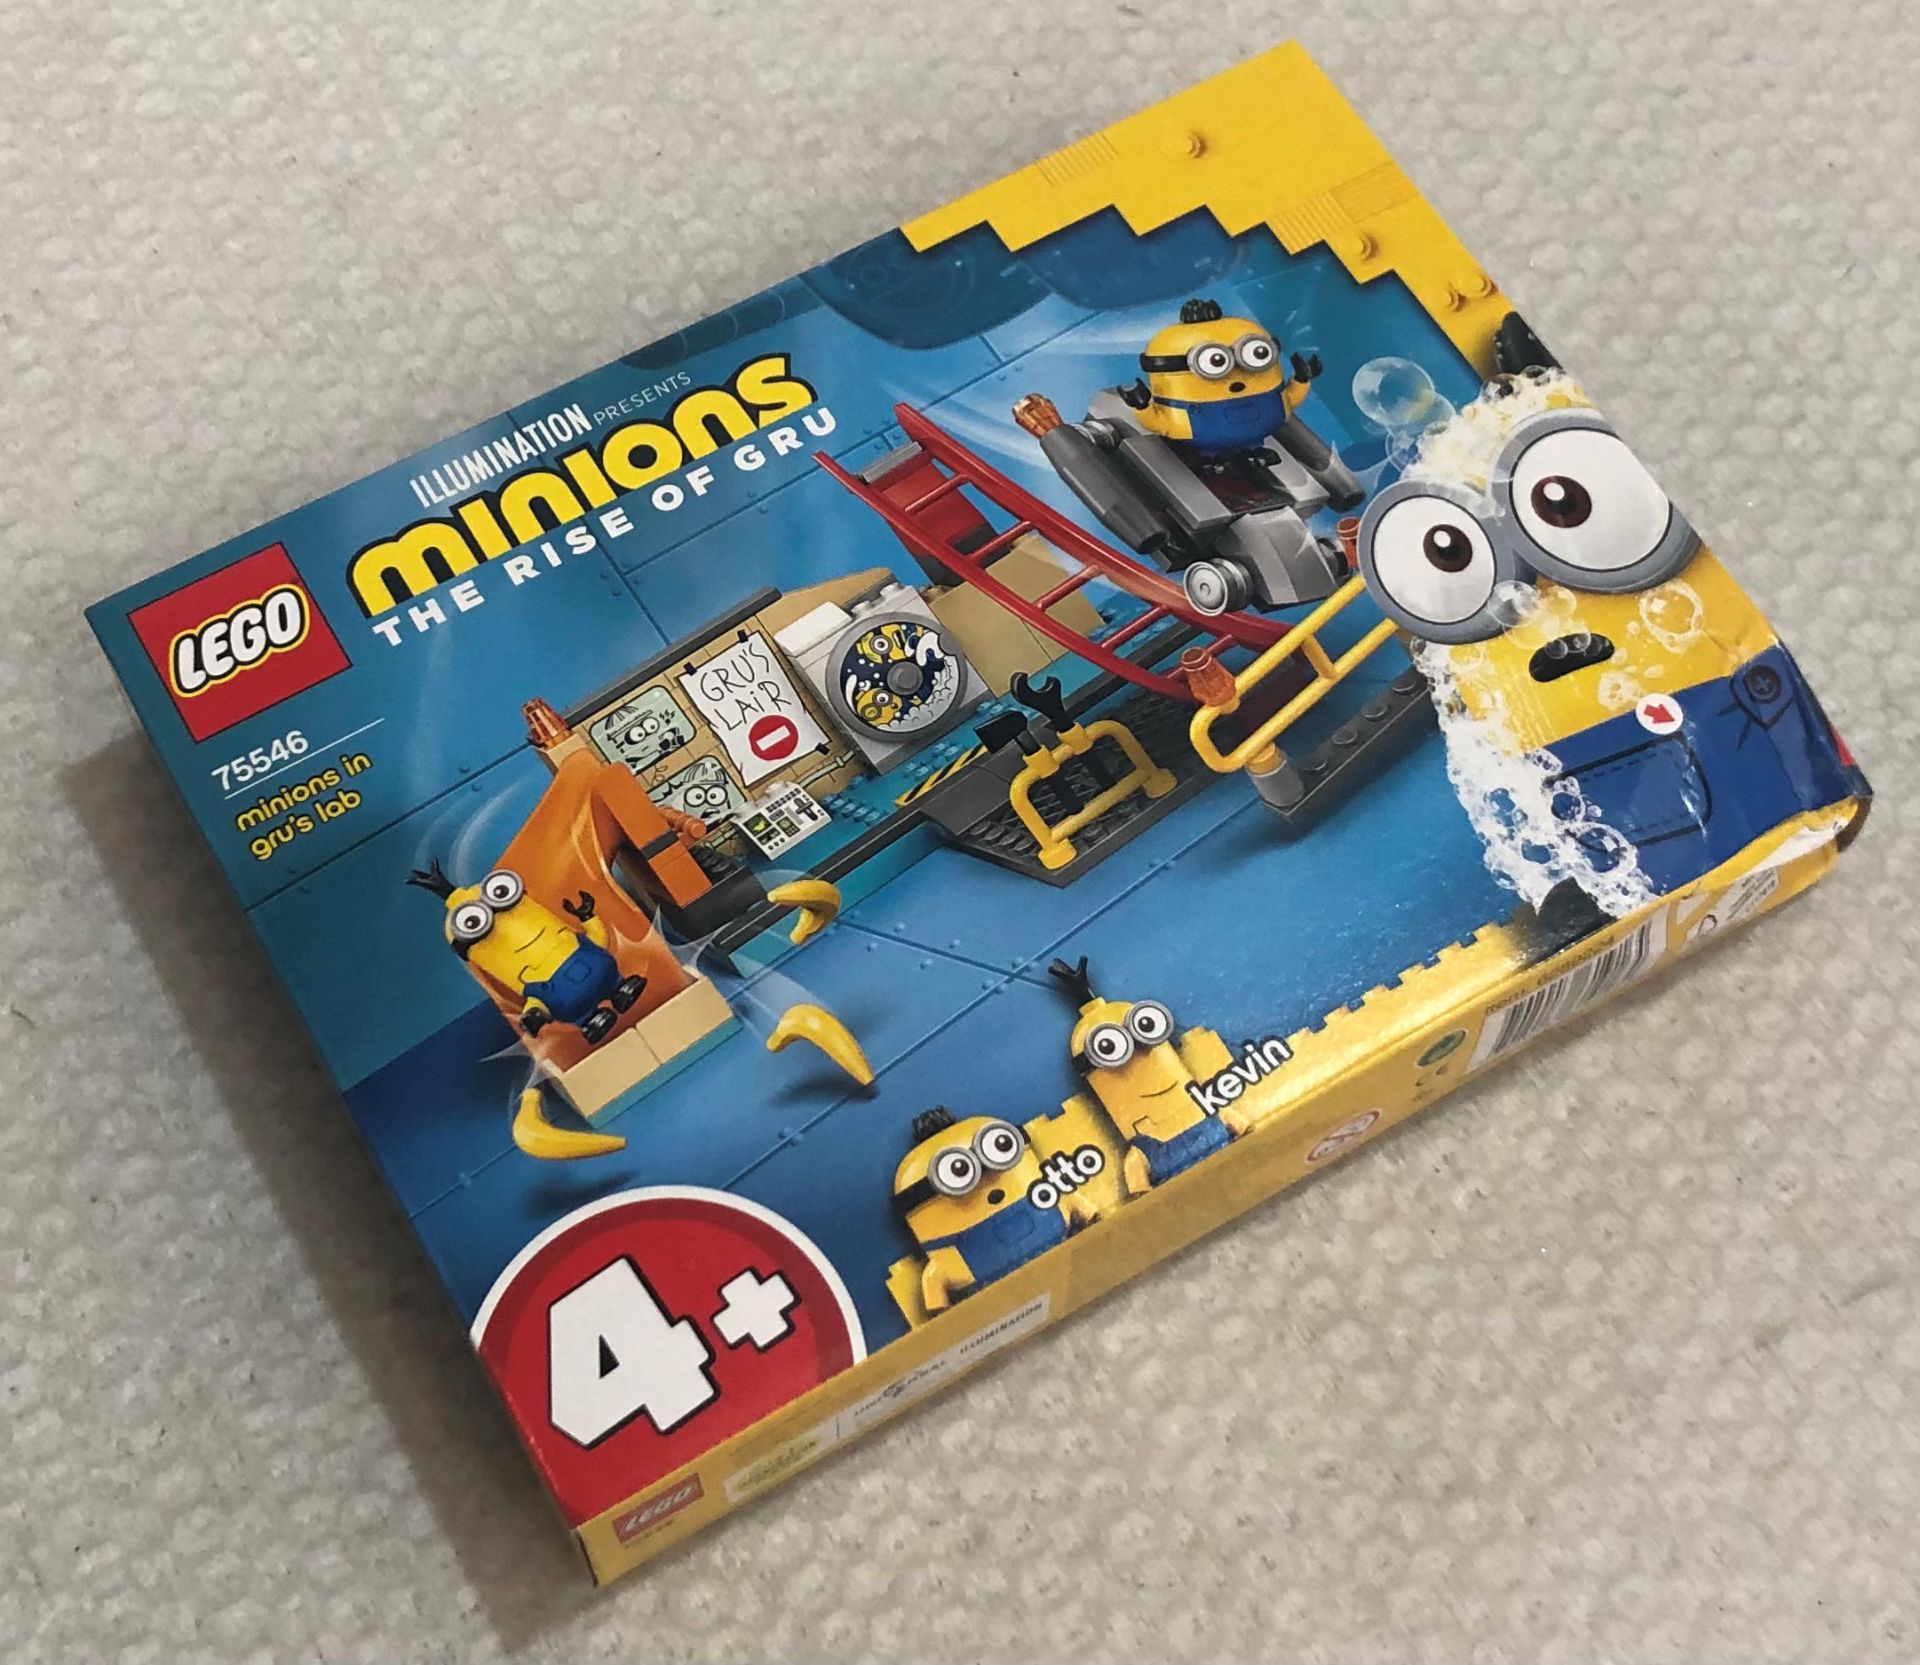 1 x Lego Minions The Rise Of Gru Minions In Gru's Lab - Model 75546 - New/Boxed - Image 3 of 5